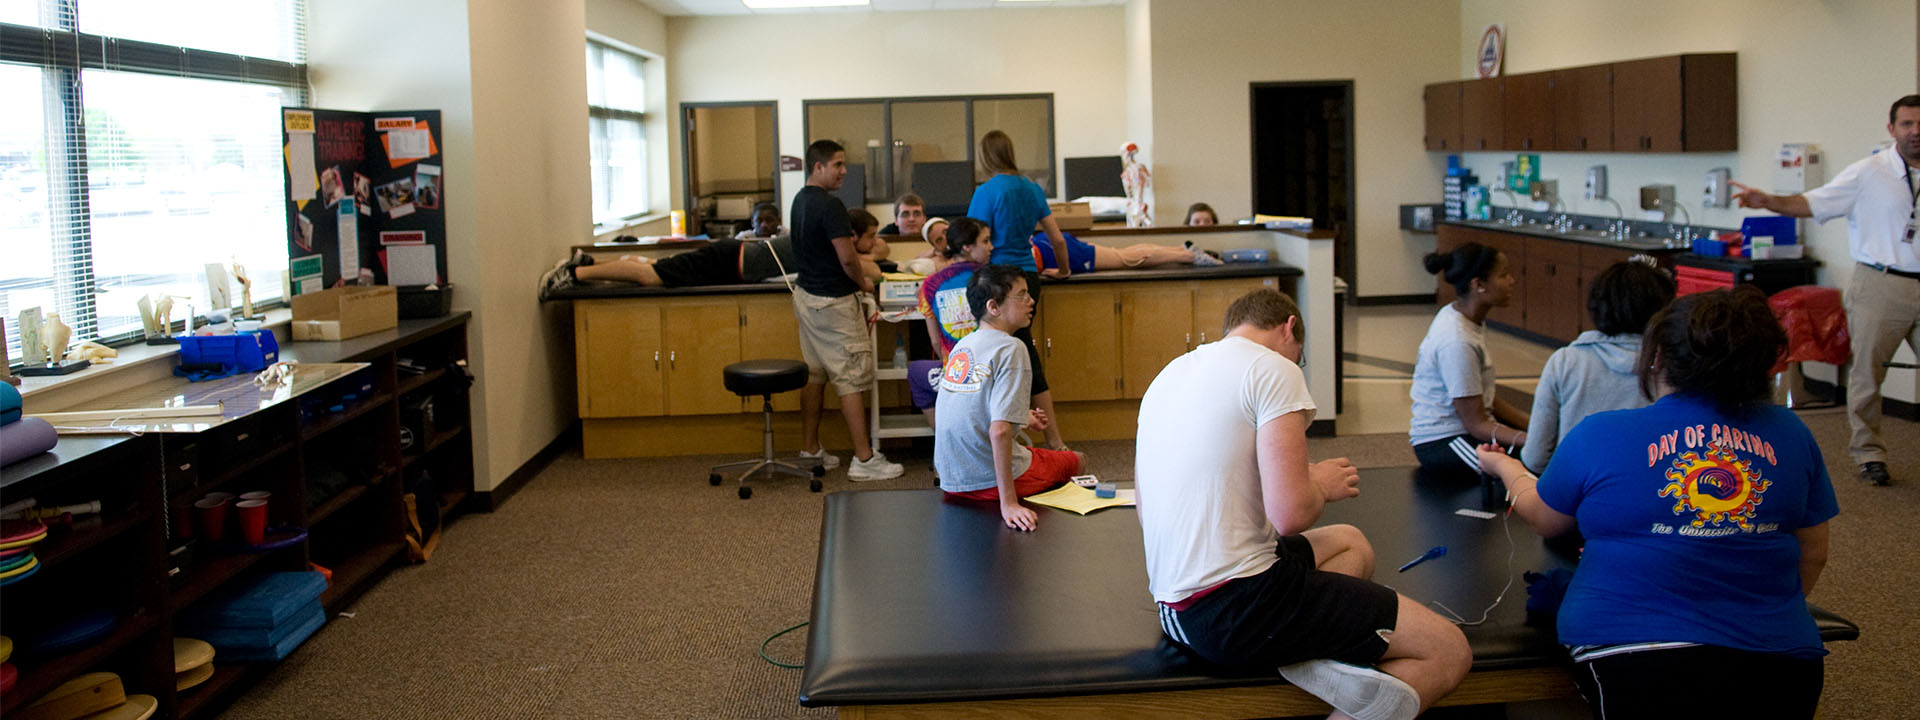 Students in a physical therapy setting